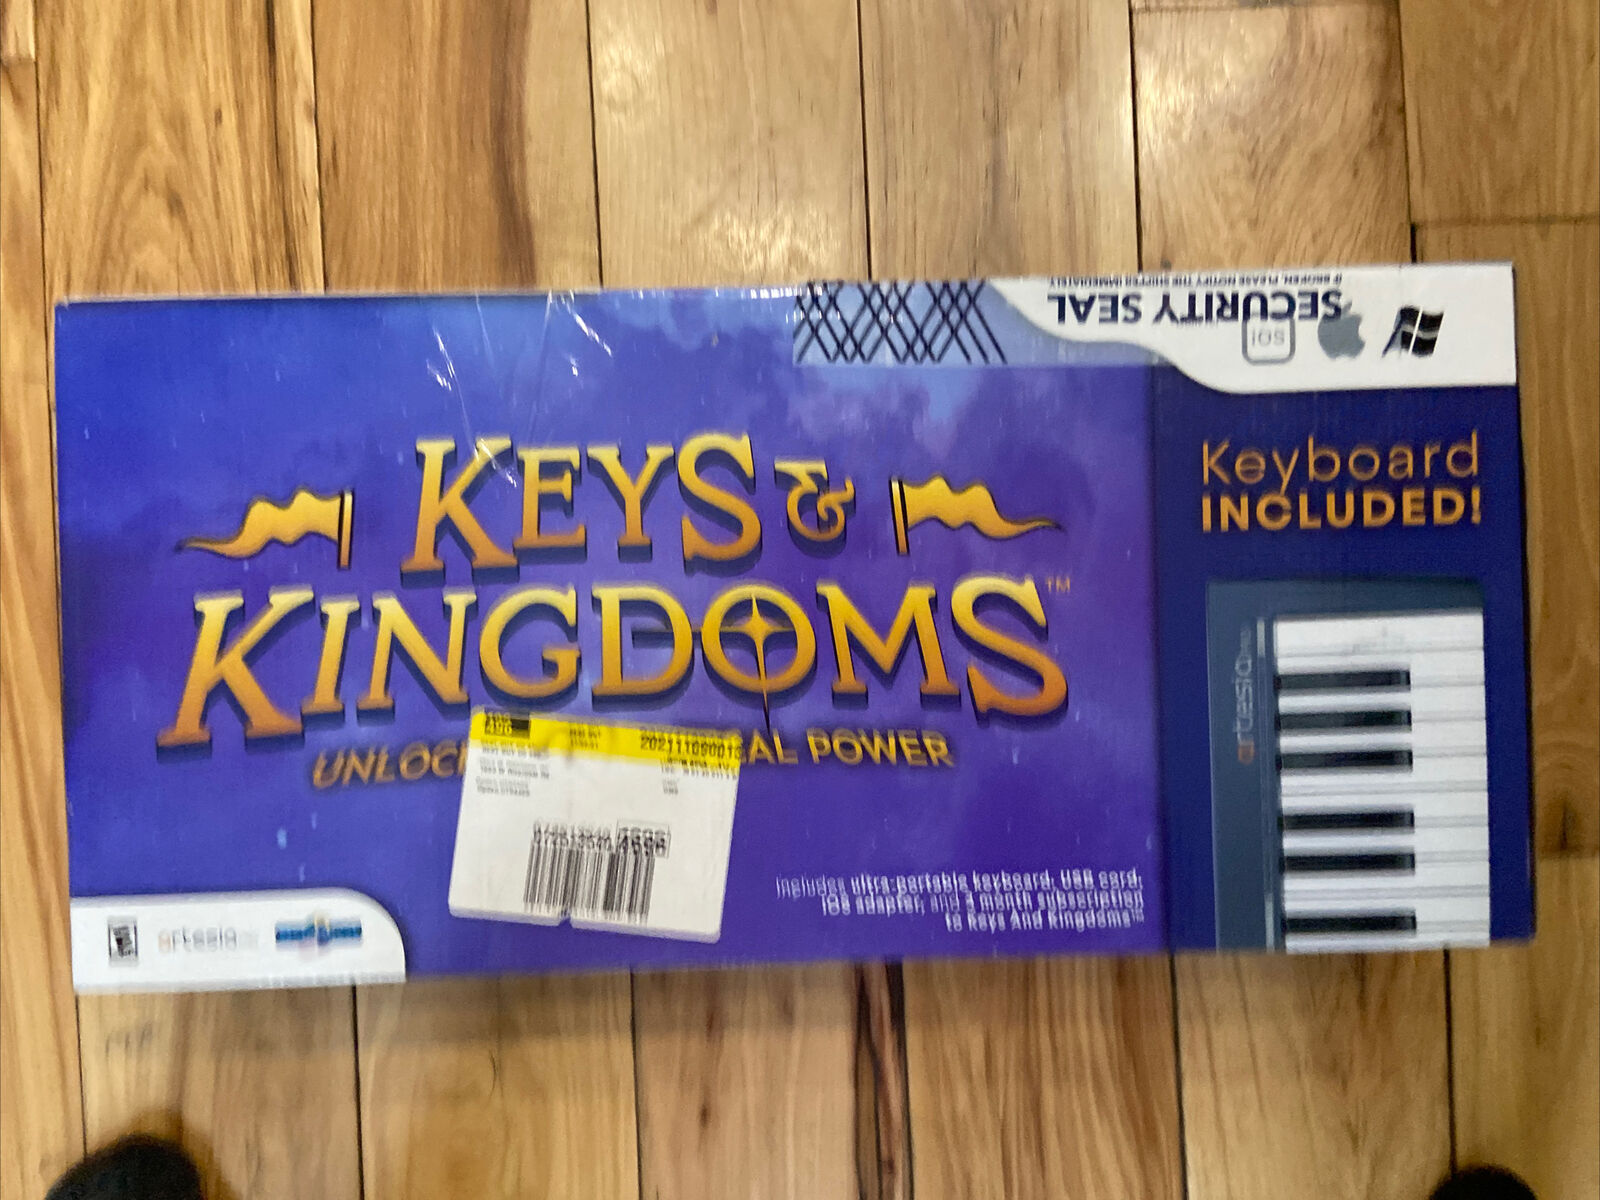 Keys and Kingdoms Piano Learning Game With Keyboard For IOS, Windows, Mac (new)